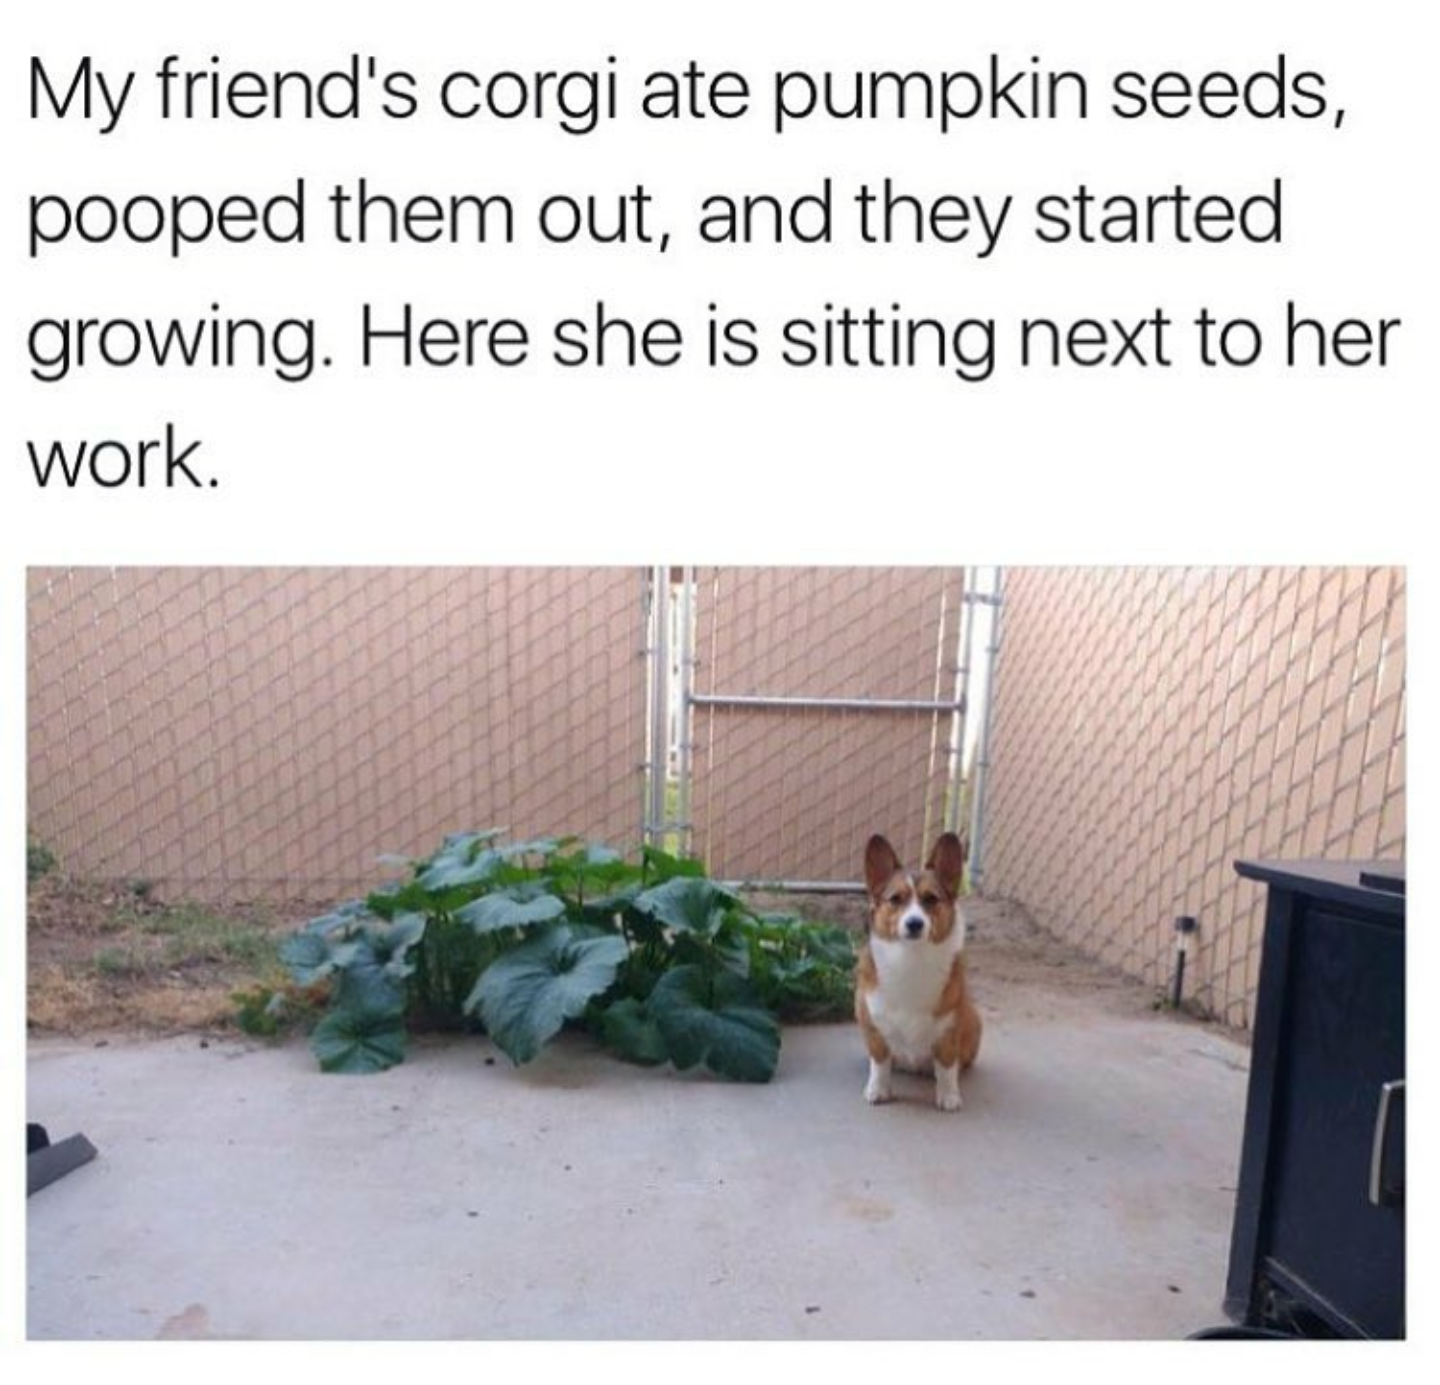 corgi pumpkin seeds - My friend's corgi ate pumpkin seeds, pooped them out, and they started growing. Here she is sitting next to her work.